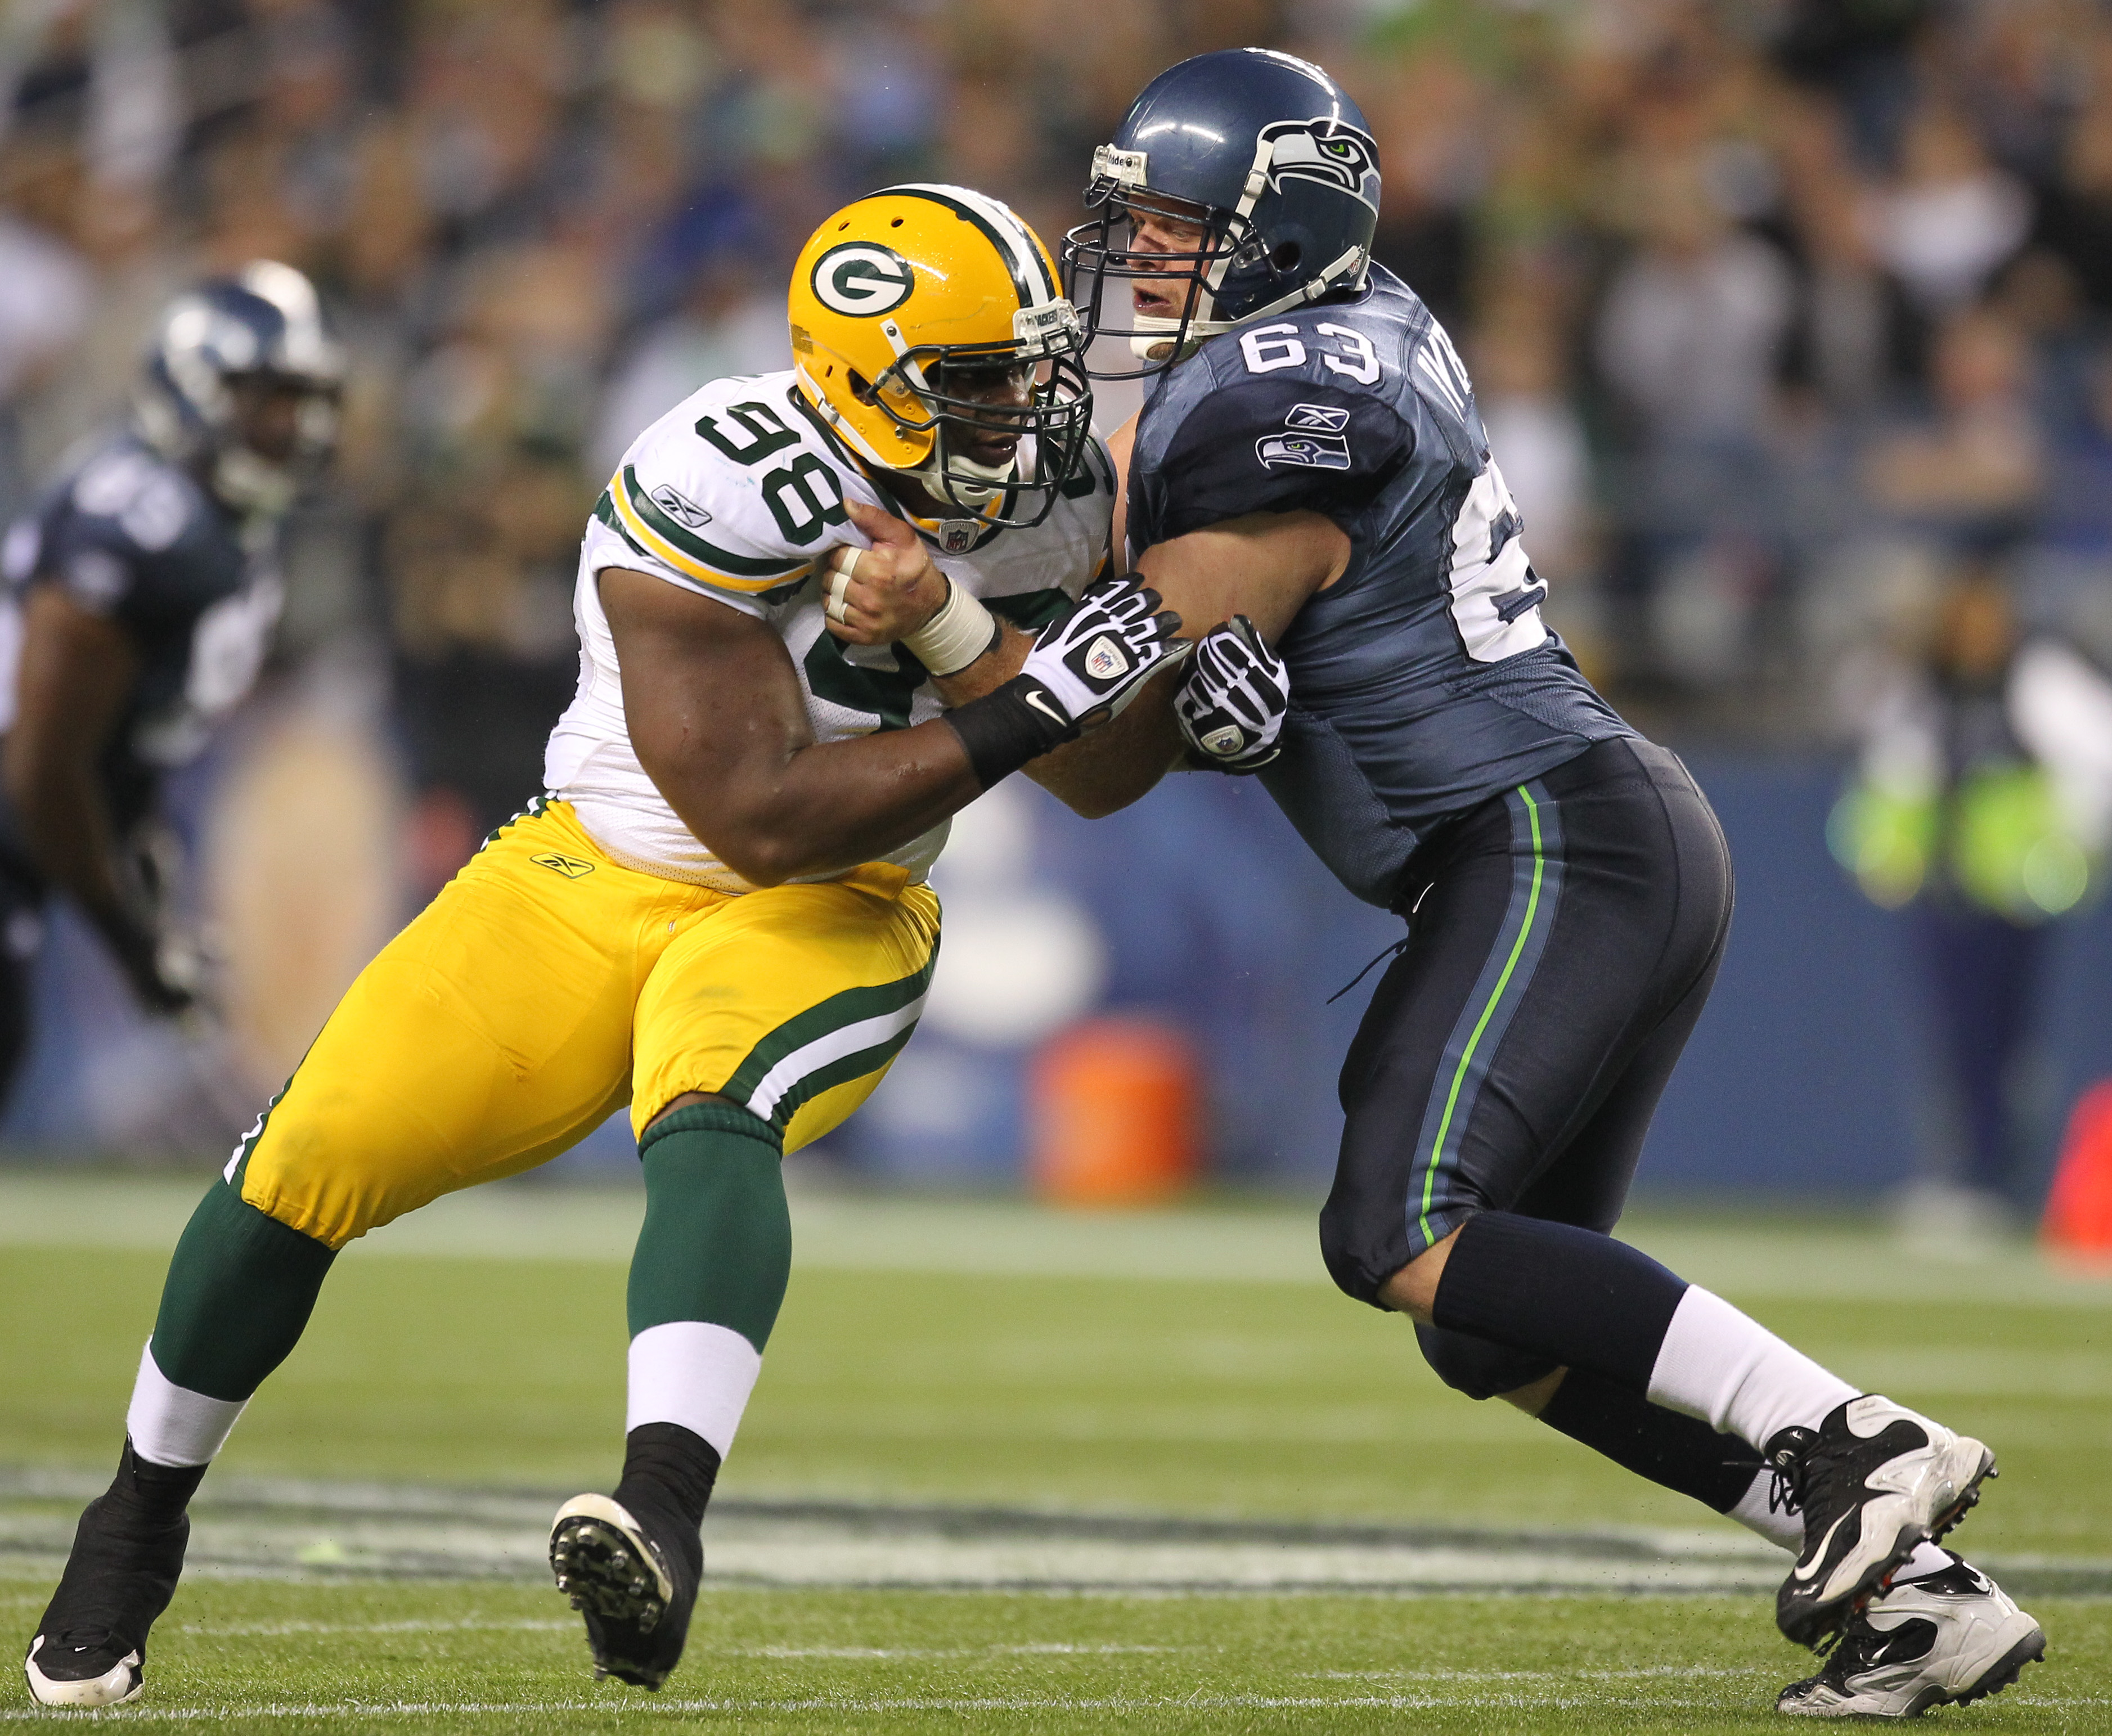 SEATTLE - AUGUST 21:  Defensive end C.J. Wilson #98 of the Green Bay Packers battles Jeff Byers #63 during the preseason game against the Seattle Seahawks at Qwest Field on August 21, 2010 in Seattle, Washington. (Photo by Otto Greule Jr/Getty Images)